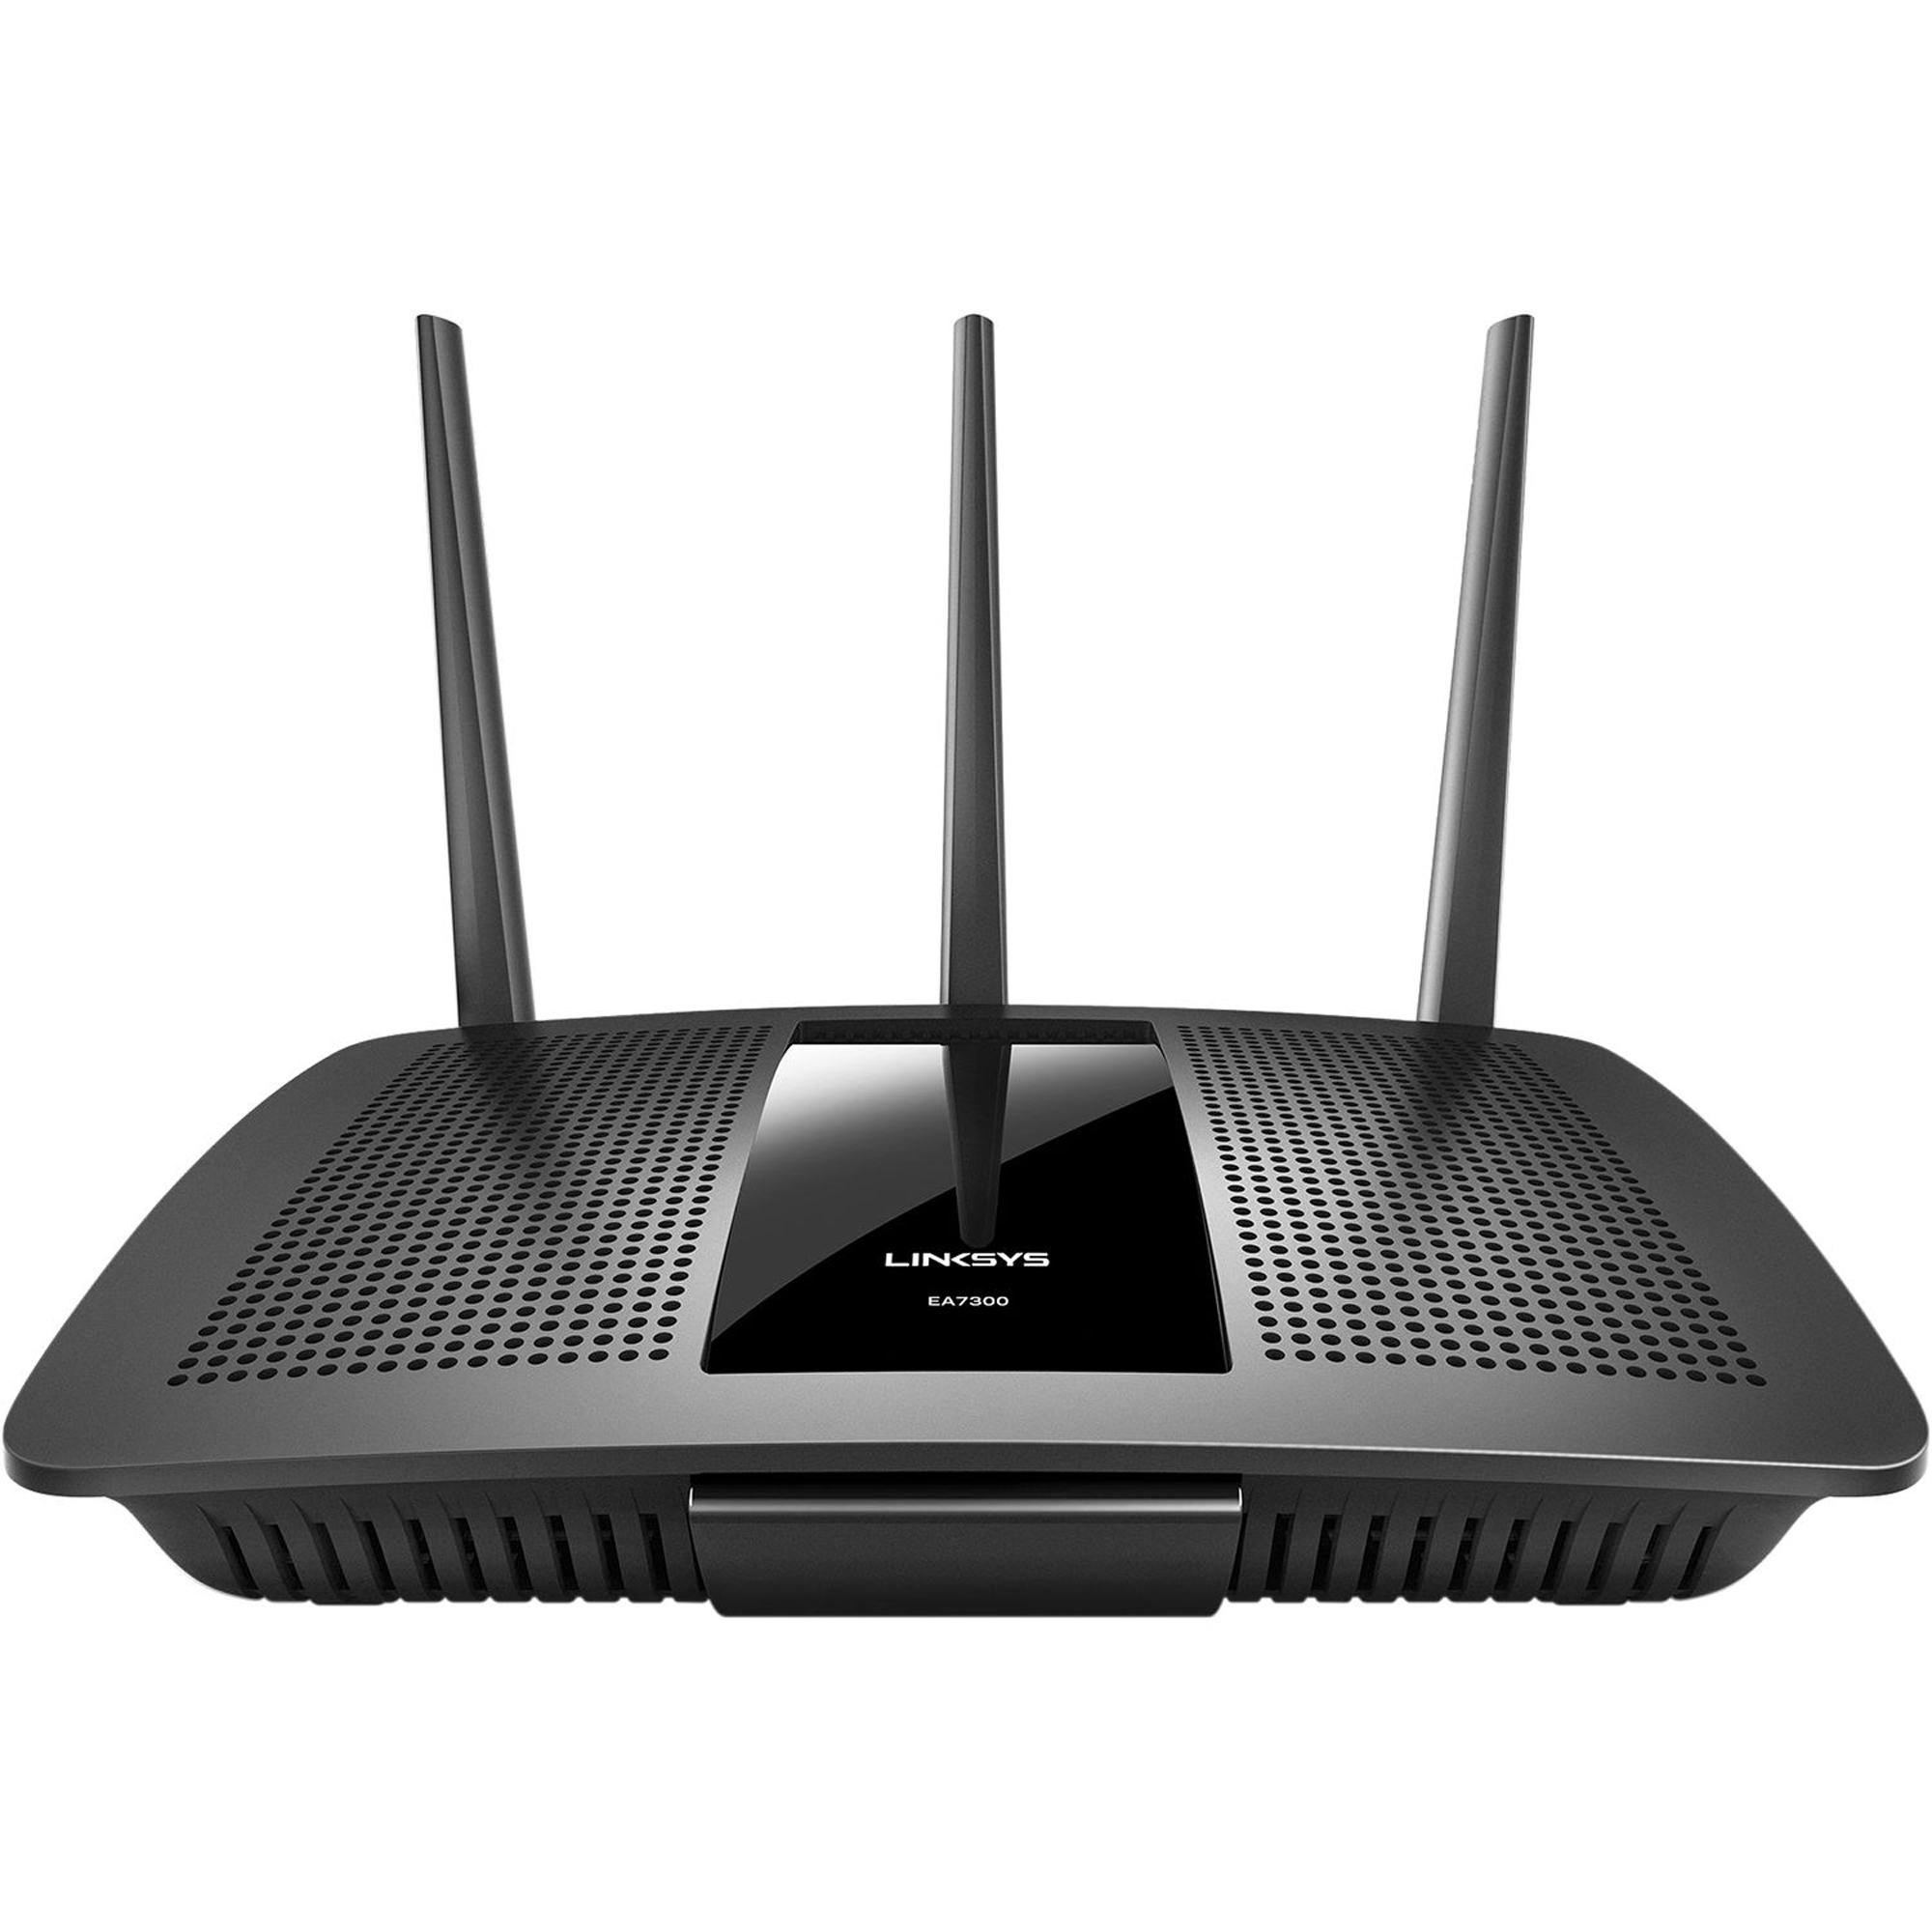 Linksys Max Stream Dual Band AC1750 Wi-Fi 5 Router, Black (EA7300) - image 1 of 8